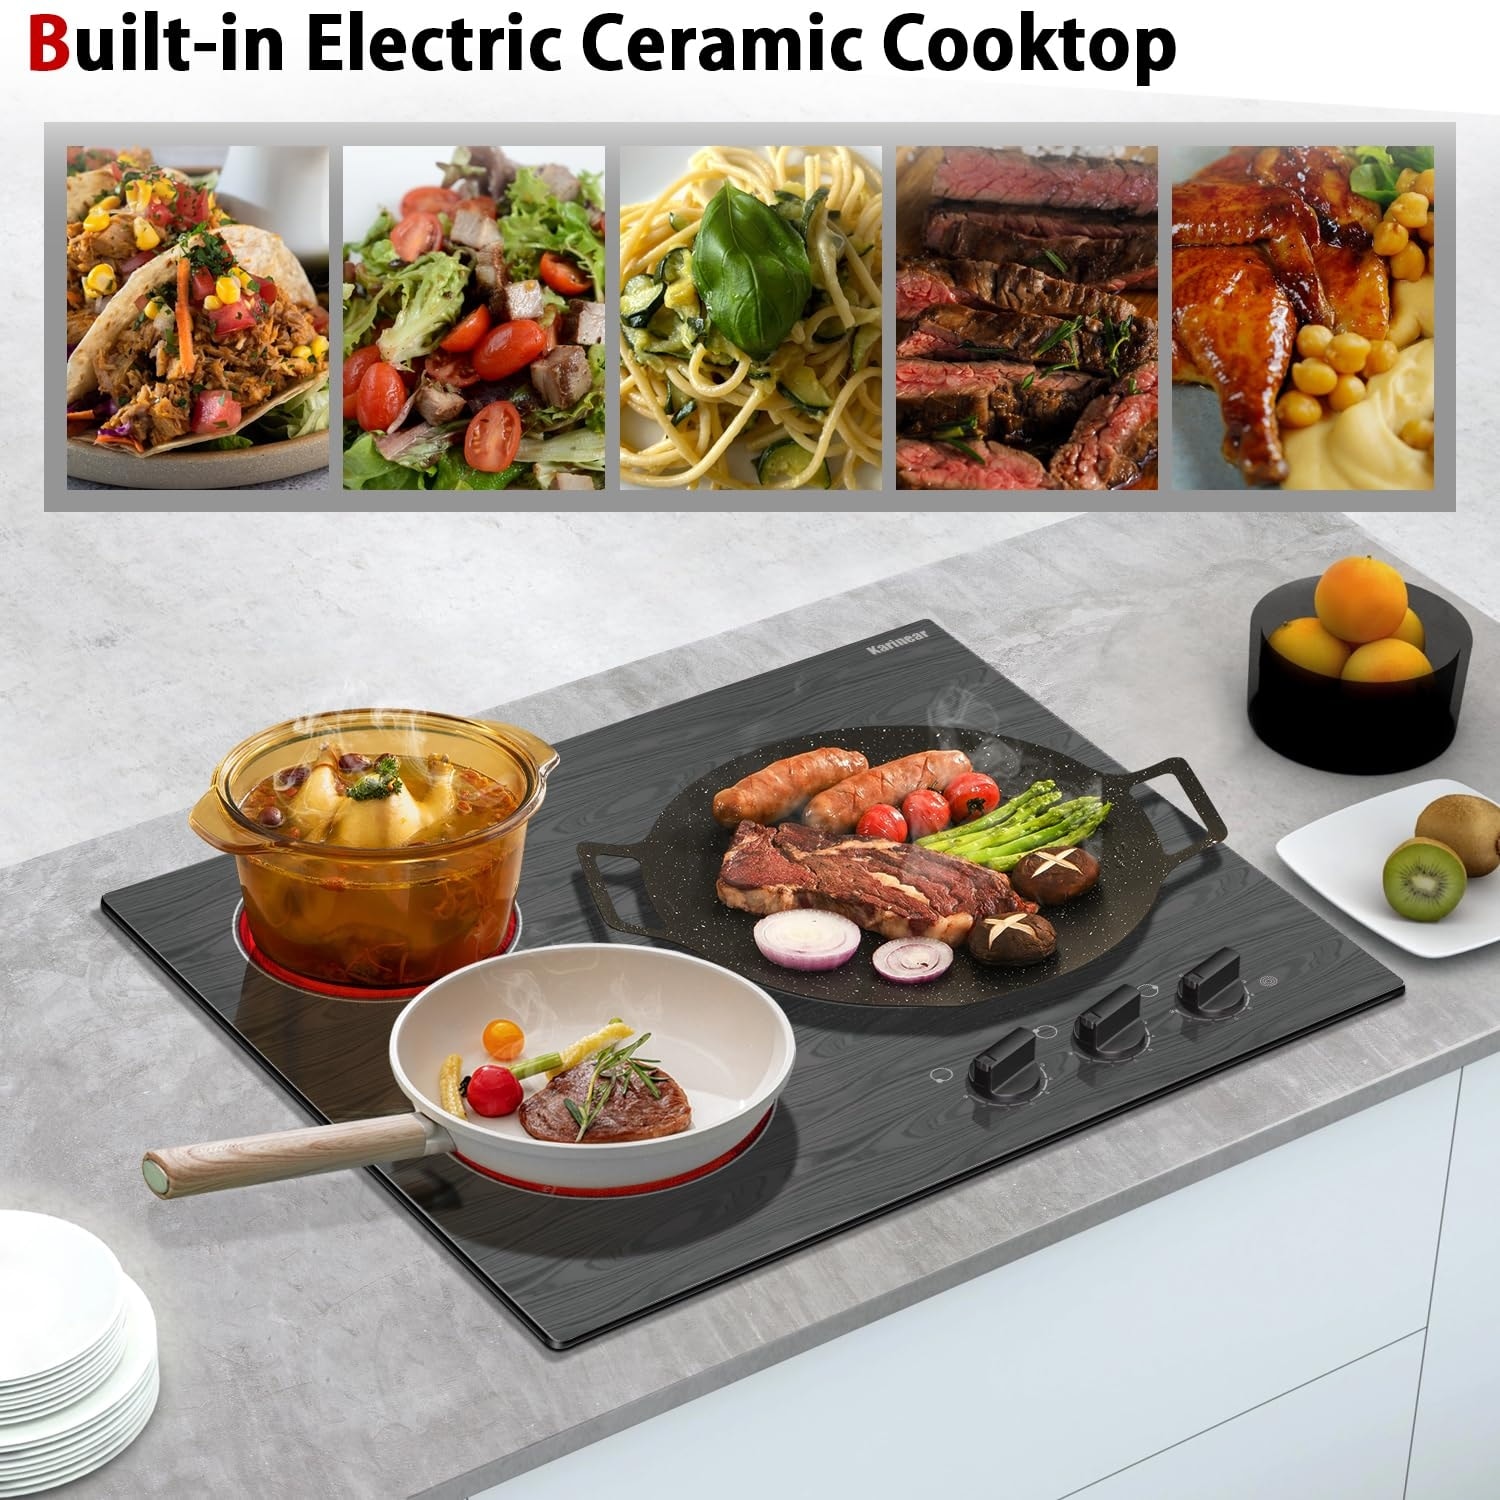 https://ak1.ostkcdn.com/images/products/is/images/direct/eef82cb19a6bc0e331808330d66d4063ceedbe19/24%22Electric-Cooktop-3-Burners-Ceramic-Cooktop-with-Wooden-Pattern%2C-Knob-Control%2C-Over-Temperature-Protection%2C-220-240v%2C-5700W.jpg